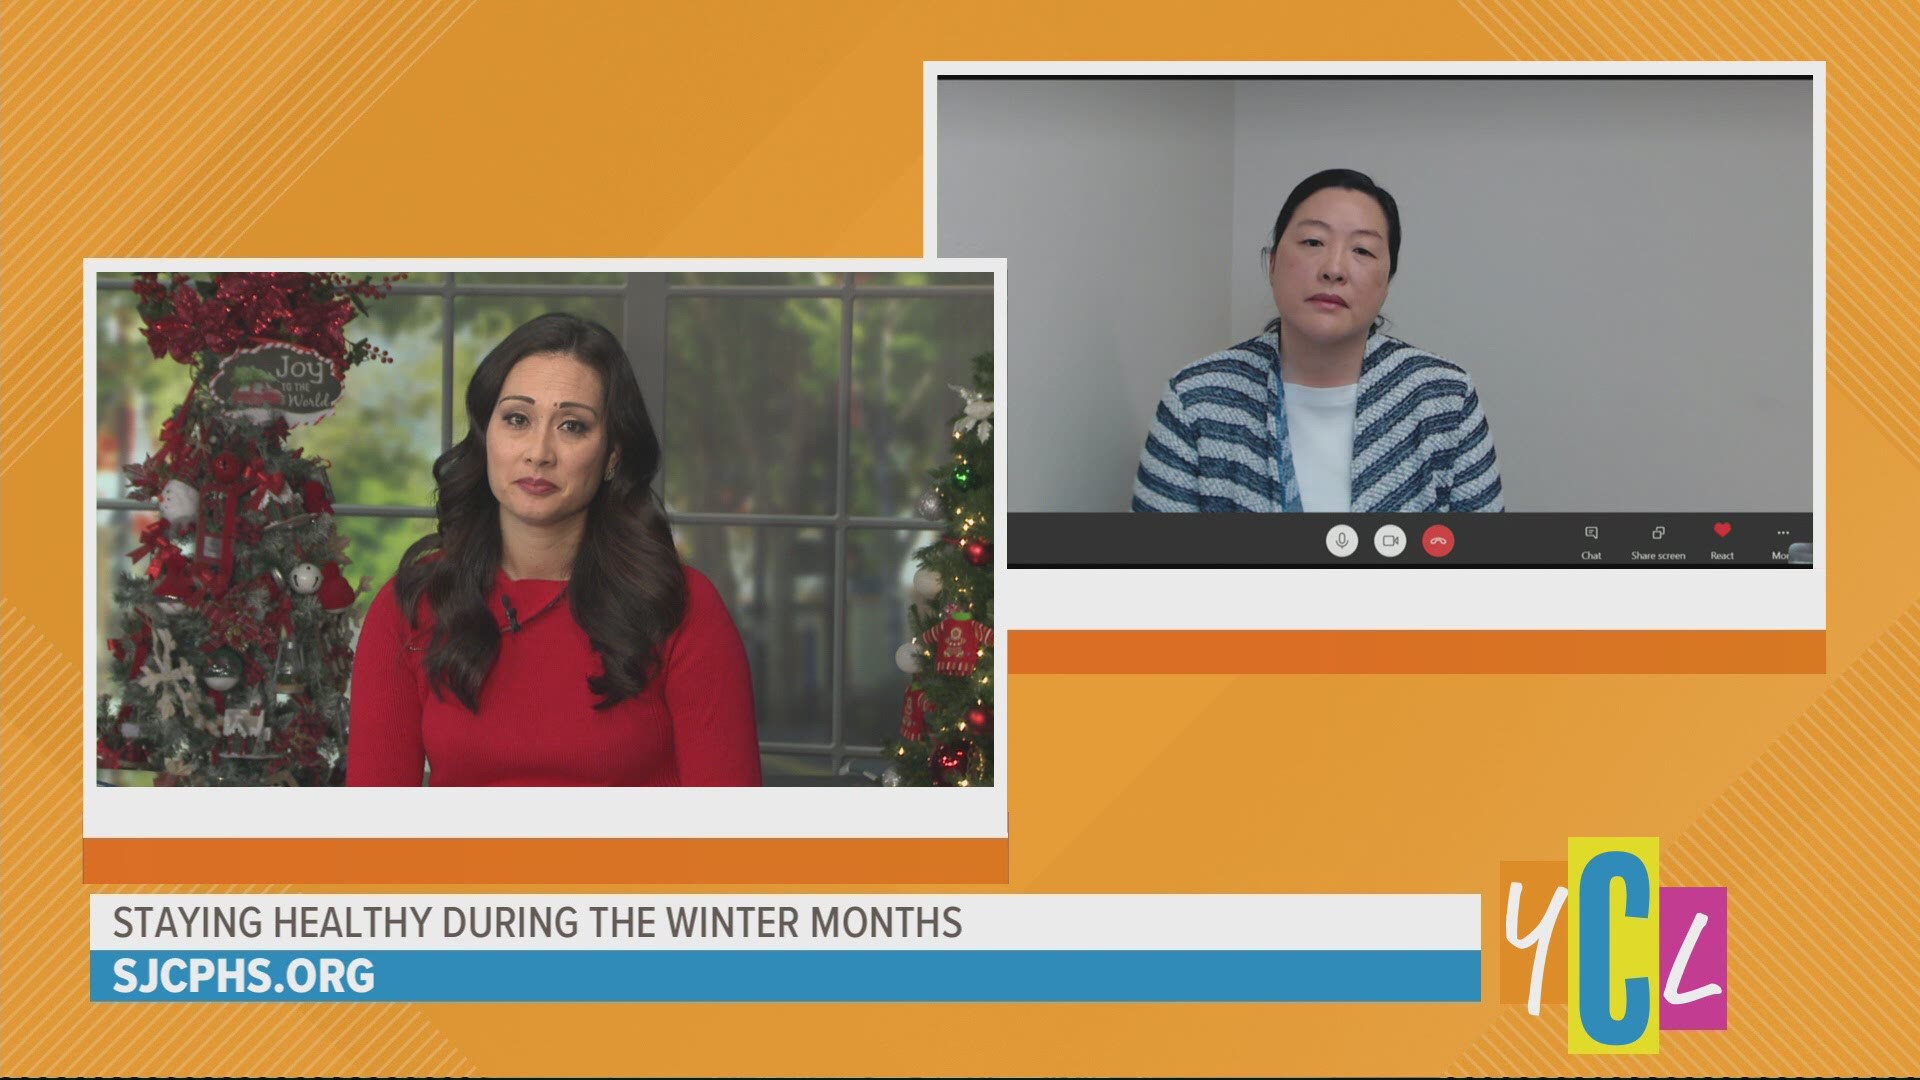 Dr. Maggie Park discusses important Covid health precautions as we approach the holidays. This segment was paid for by San Joaquin County Public Health Services.